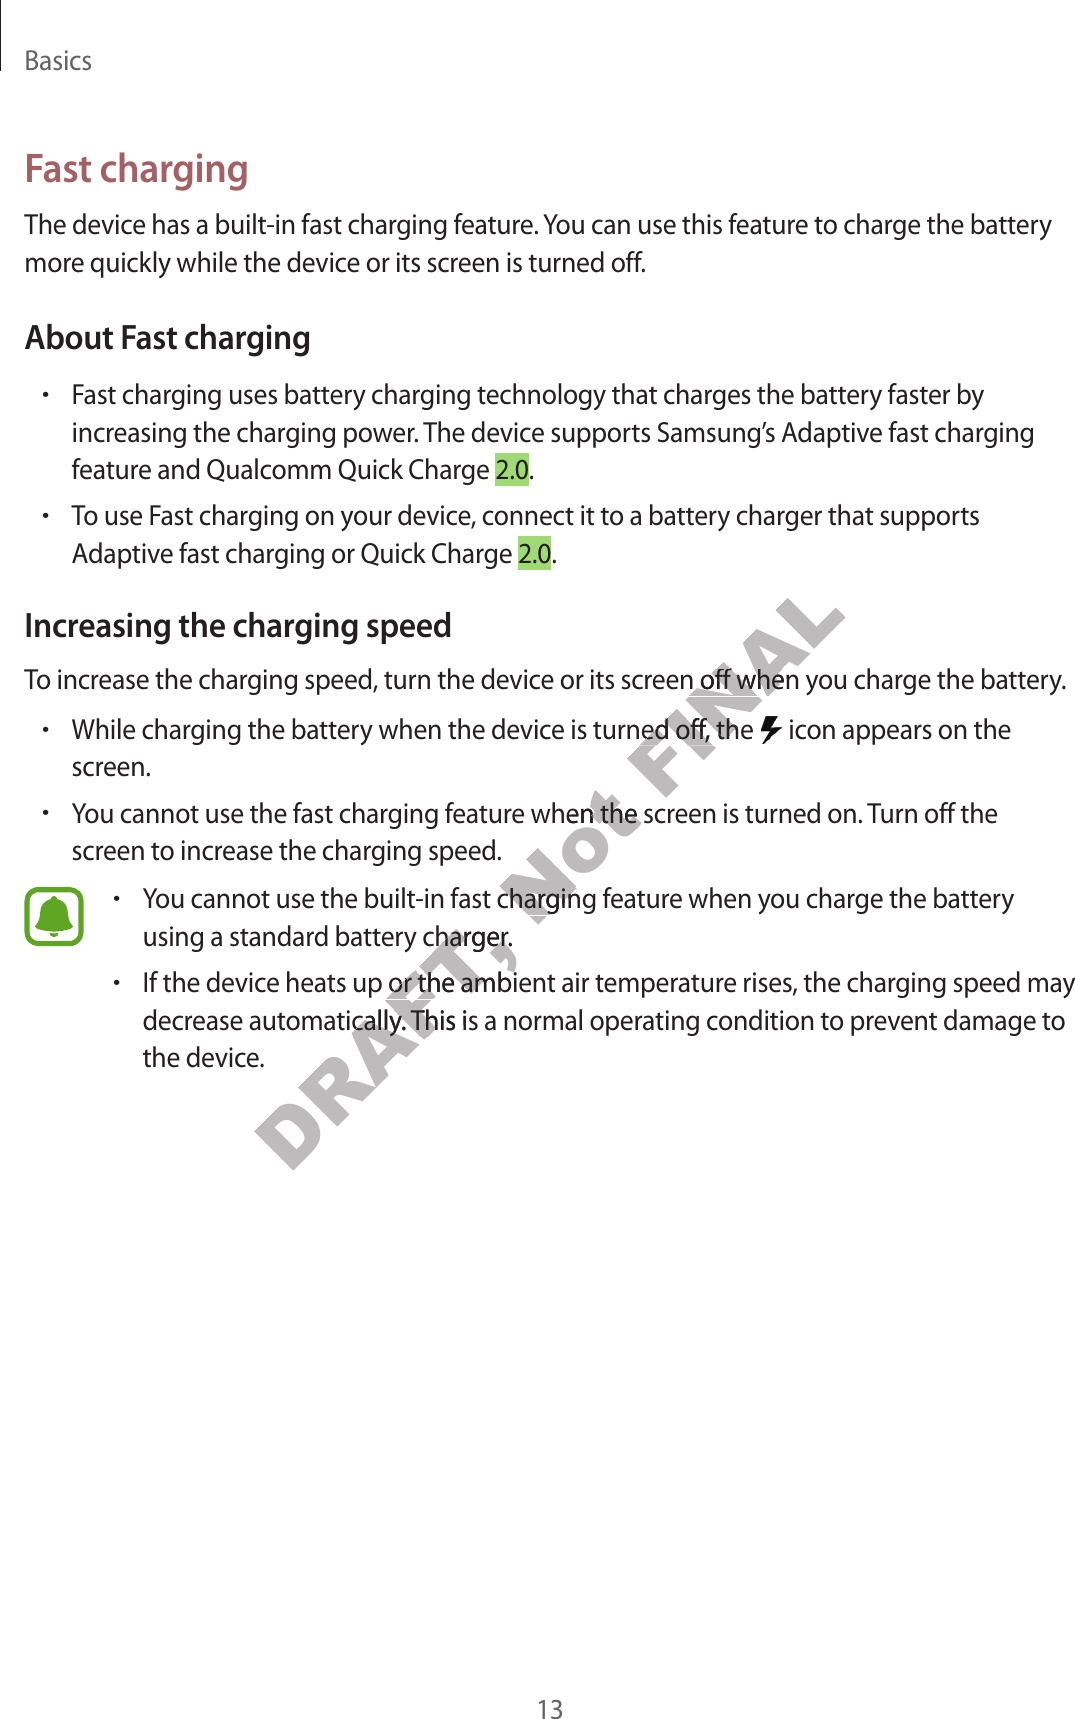 Basics13Fast chargingThe device has a built-in fast charging feature. You can use this feature to charge the battery more quickly while the device or its screen is turned off.About Fast charging•Fast charging uses battery charging technology that charges the battery faster by increasing the charging power. The device supports Samsung’s Adaptive fast charging feature and Qualcomm Quick Charge 2.0.•To use Fast charging on your device, connect it to a battery charger that supports Adaptive fast charging or Quick Charge 2.0.Increasing the charging speedTo increase the charging speed, turn the device or its screen off when you charge the battery.•While charging the battery when the device is turned off, the   icon appears on the screen.•You cannot use the fast charging feature when the screen is turned on. Turn off the screen to increase the charging speed.•You cannot use the built-in fast charging feature when you charge the battery using a standard battery charger.•If the device heats up or the ambient air temperature rises, the charging speed may decrease automatically. This is a normal operating condition to prevent damage to the device.DRAFT, -in fast charDRAFT, y charger.y charger.ts up or the ambients up or the ambienDRAFT, omatically. This is a noromatically. This is a norNot e when the scre when the scr-in fast charging f-in fast charging fFINALeen off when yeen off when ye is turned off, the e is turned off, the 